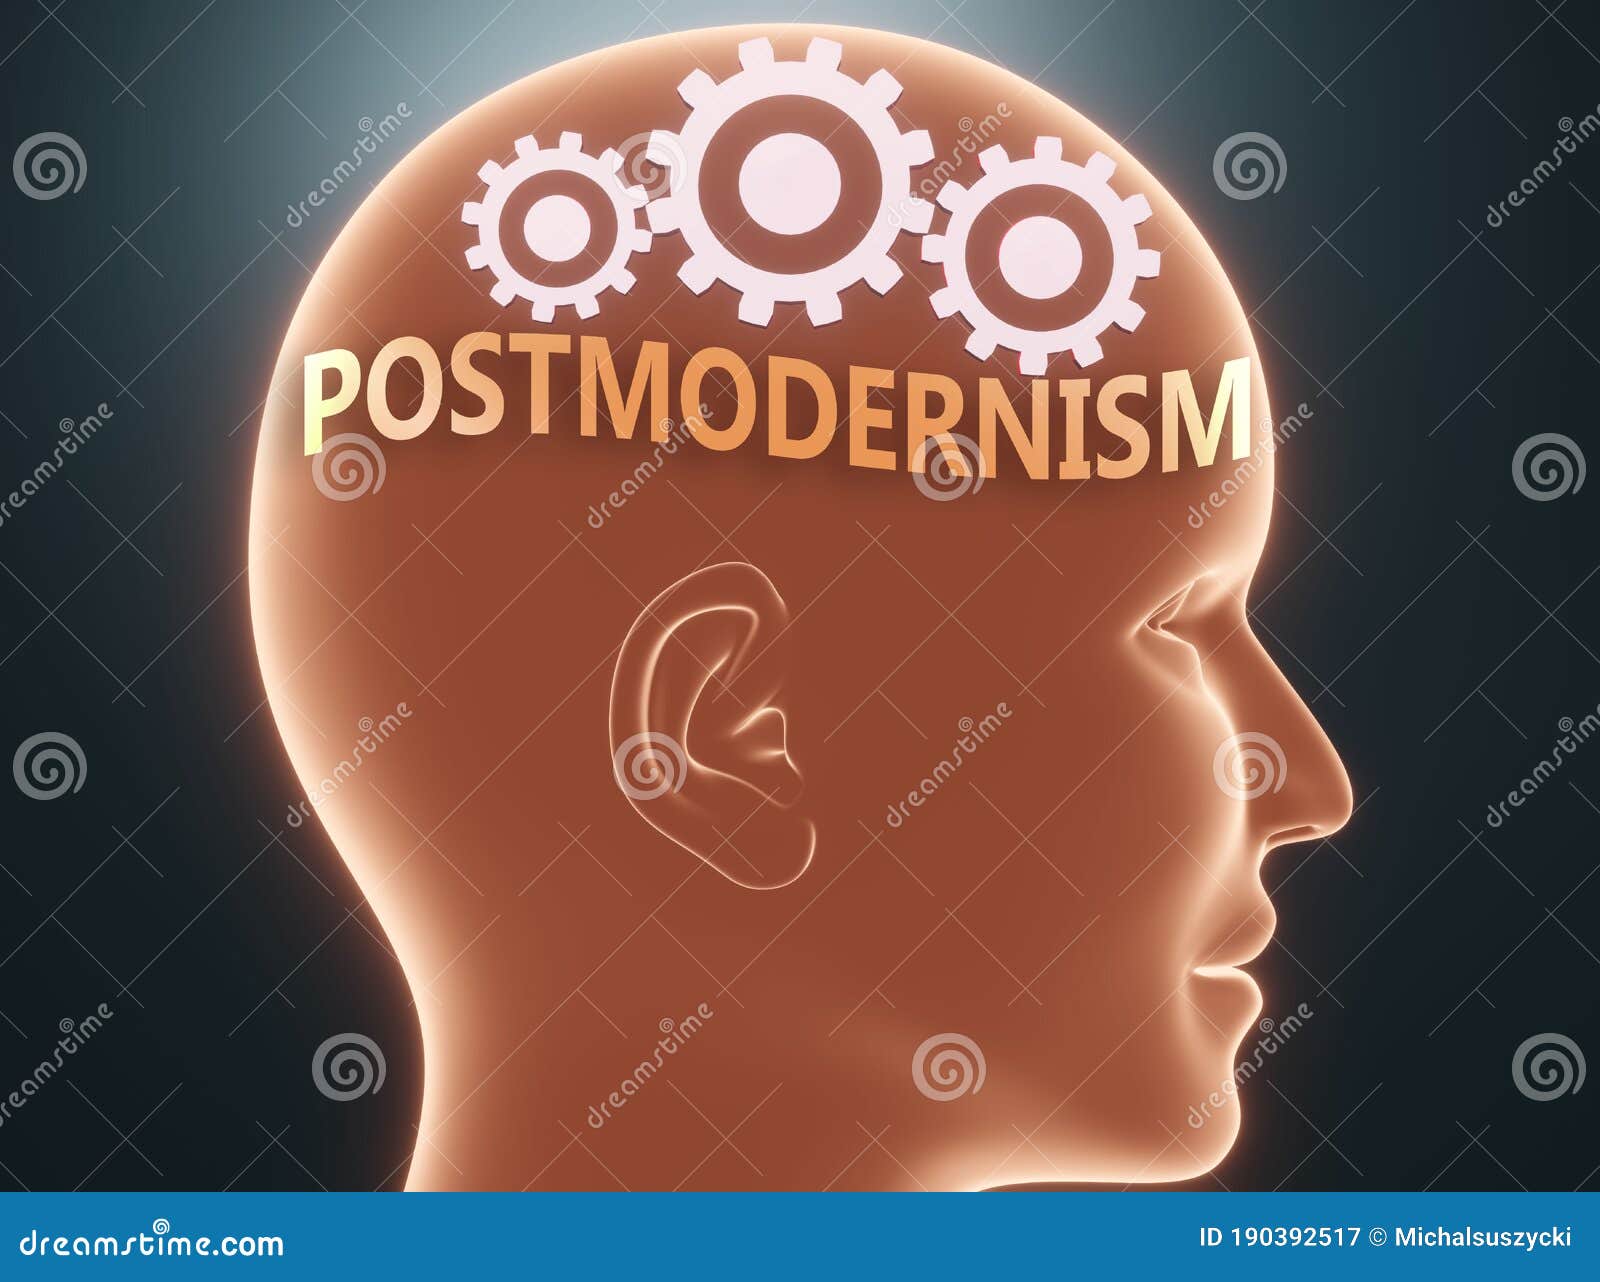 postmodernism inside human mind - pictured as word postmodernism inside a head with cogwheels to ize that postmodernism is